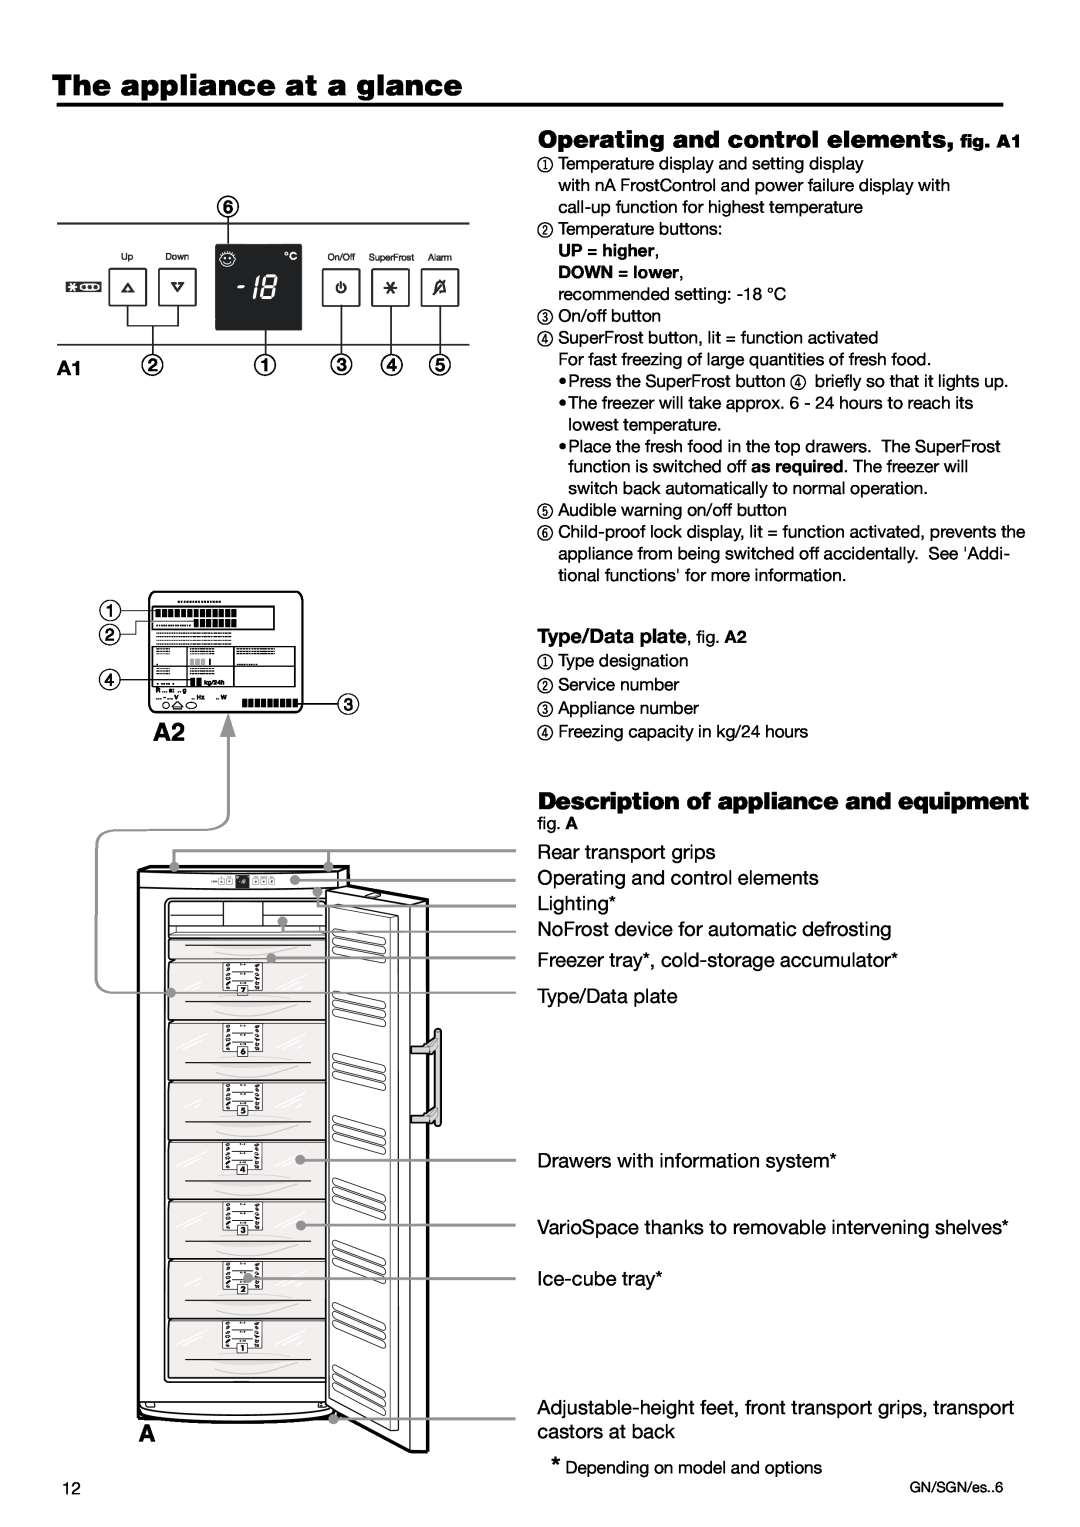 Liebherr 7082 300-03 manual The appliance at a glance, Operating and control elements, ﬁg. A1, Type/Data plate, ﬁg. A2 